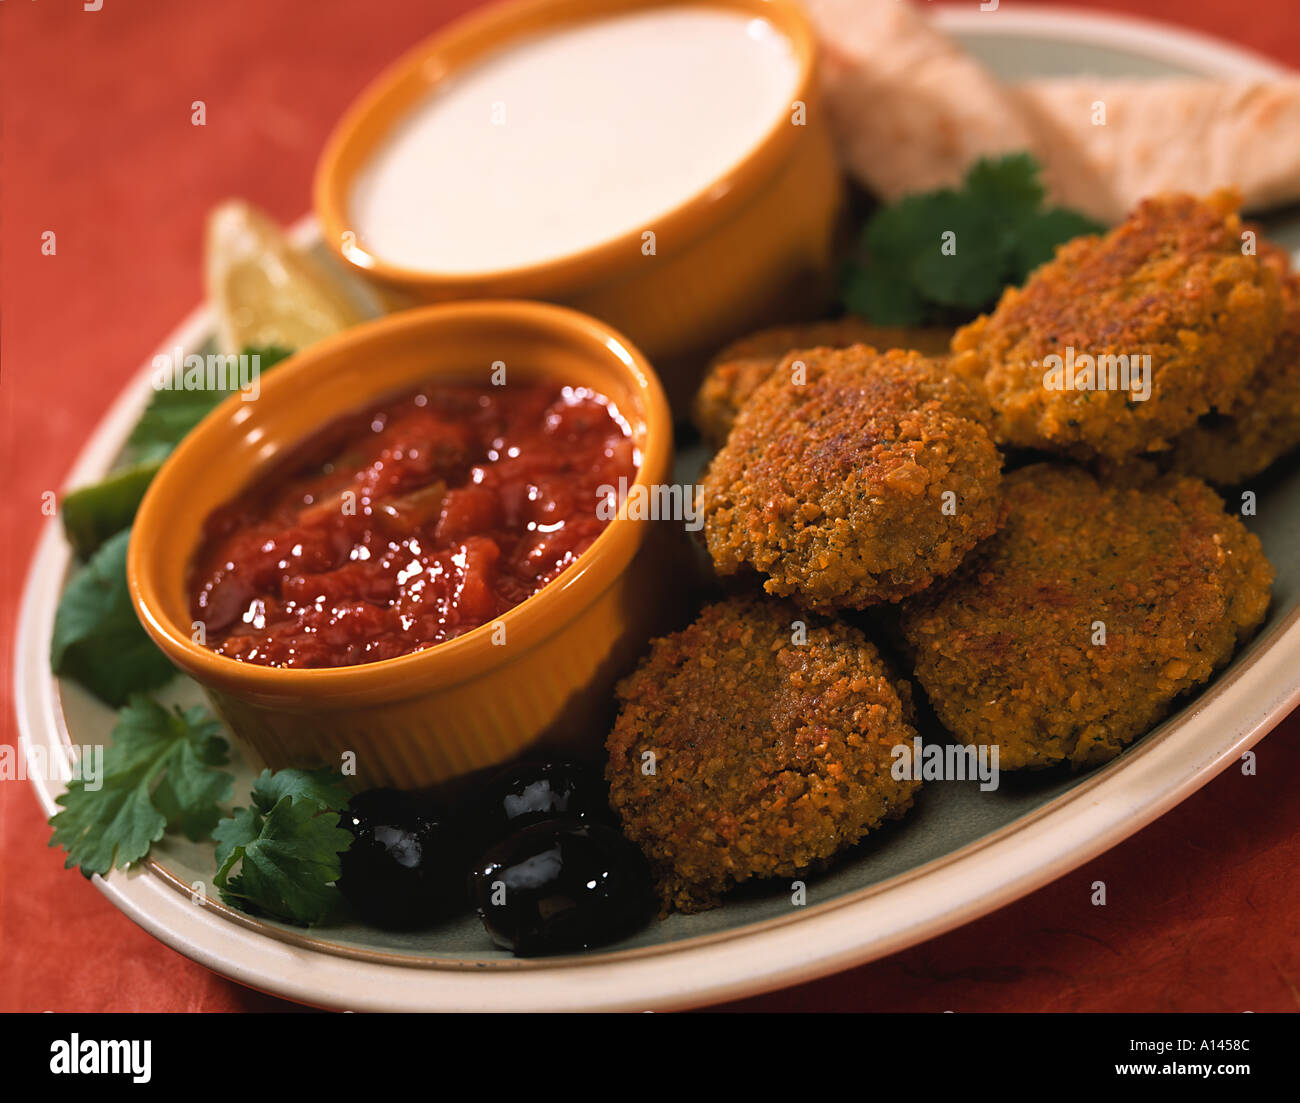 MEXICAN TAPAS ON PLATE Stock Photo